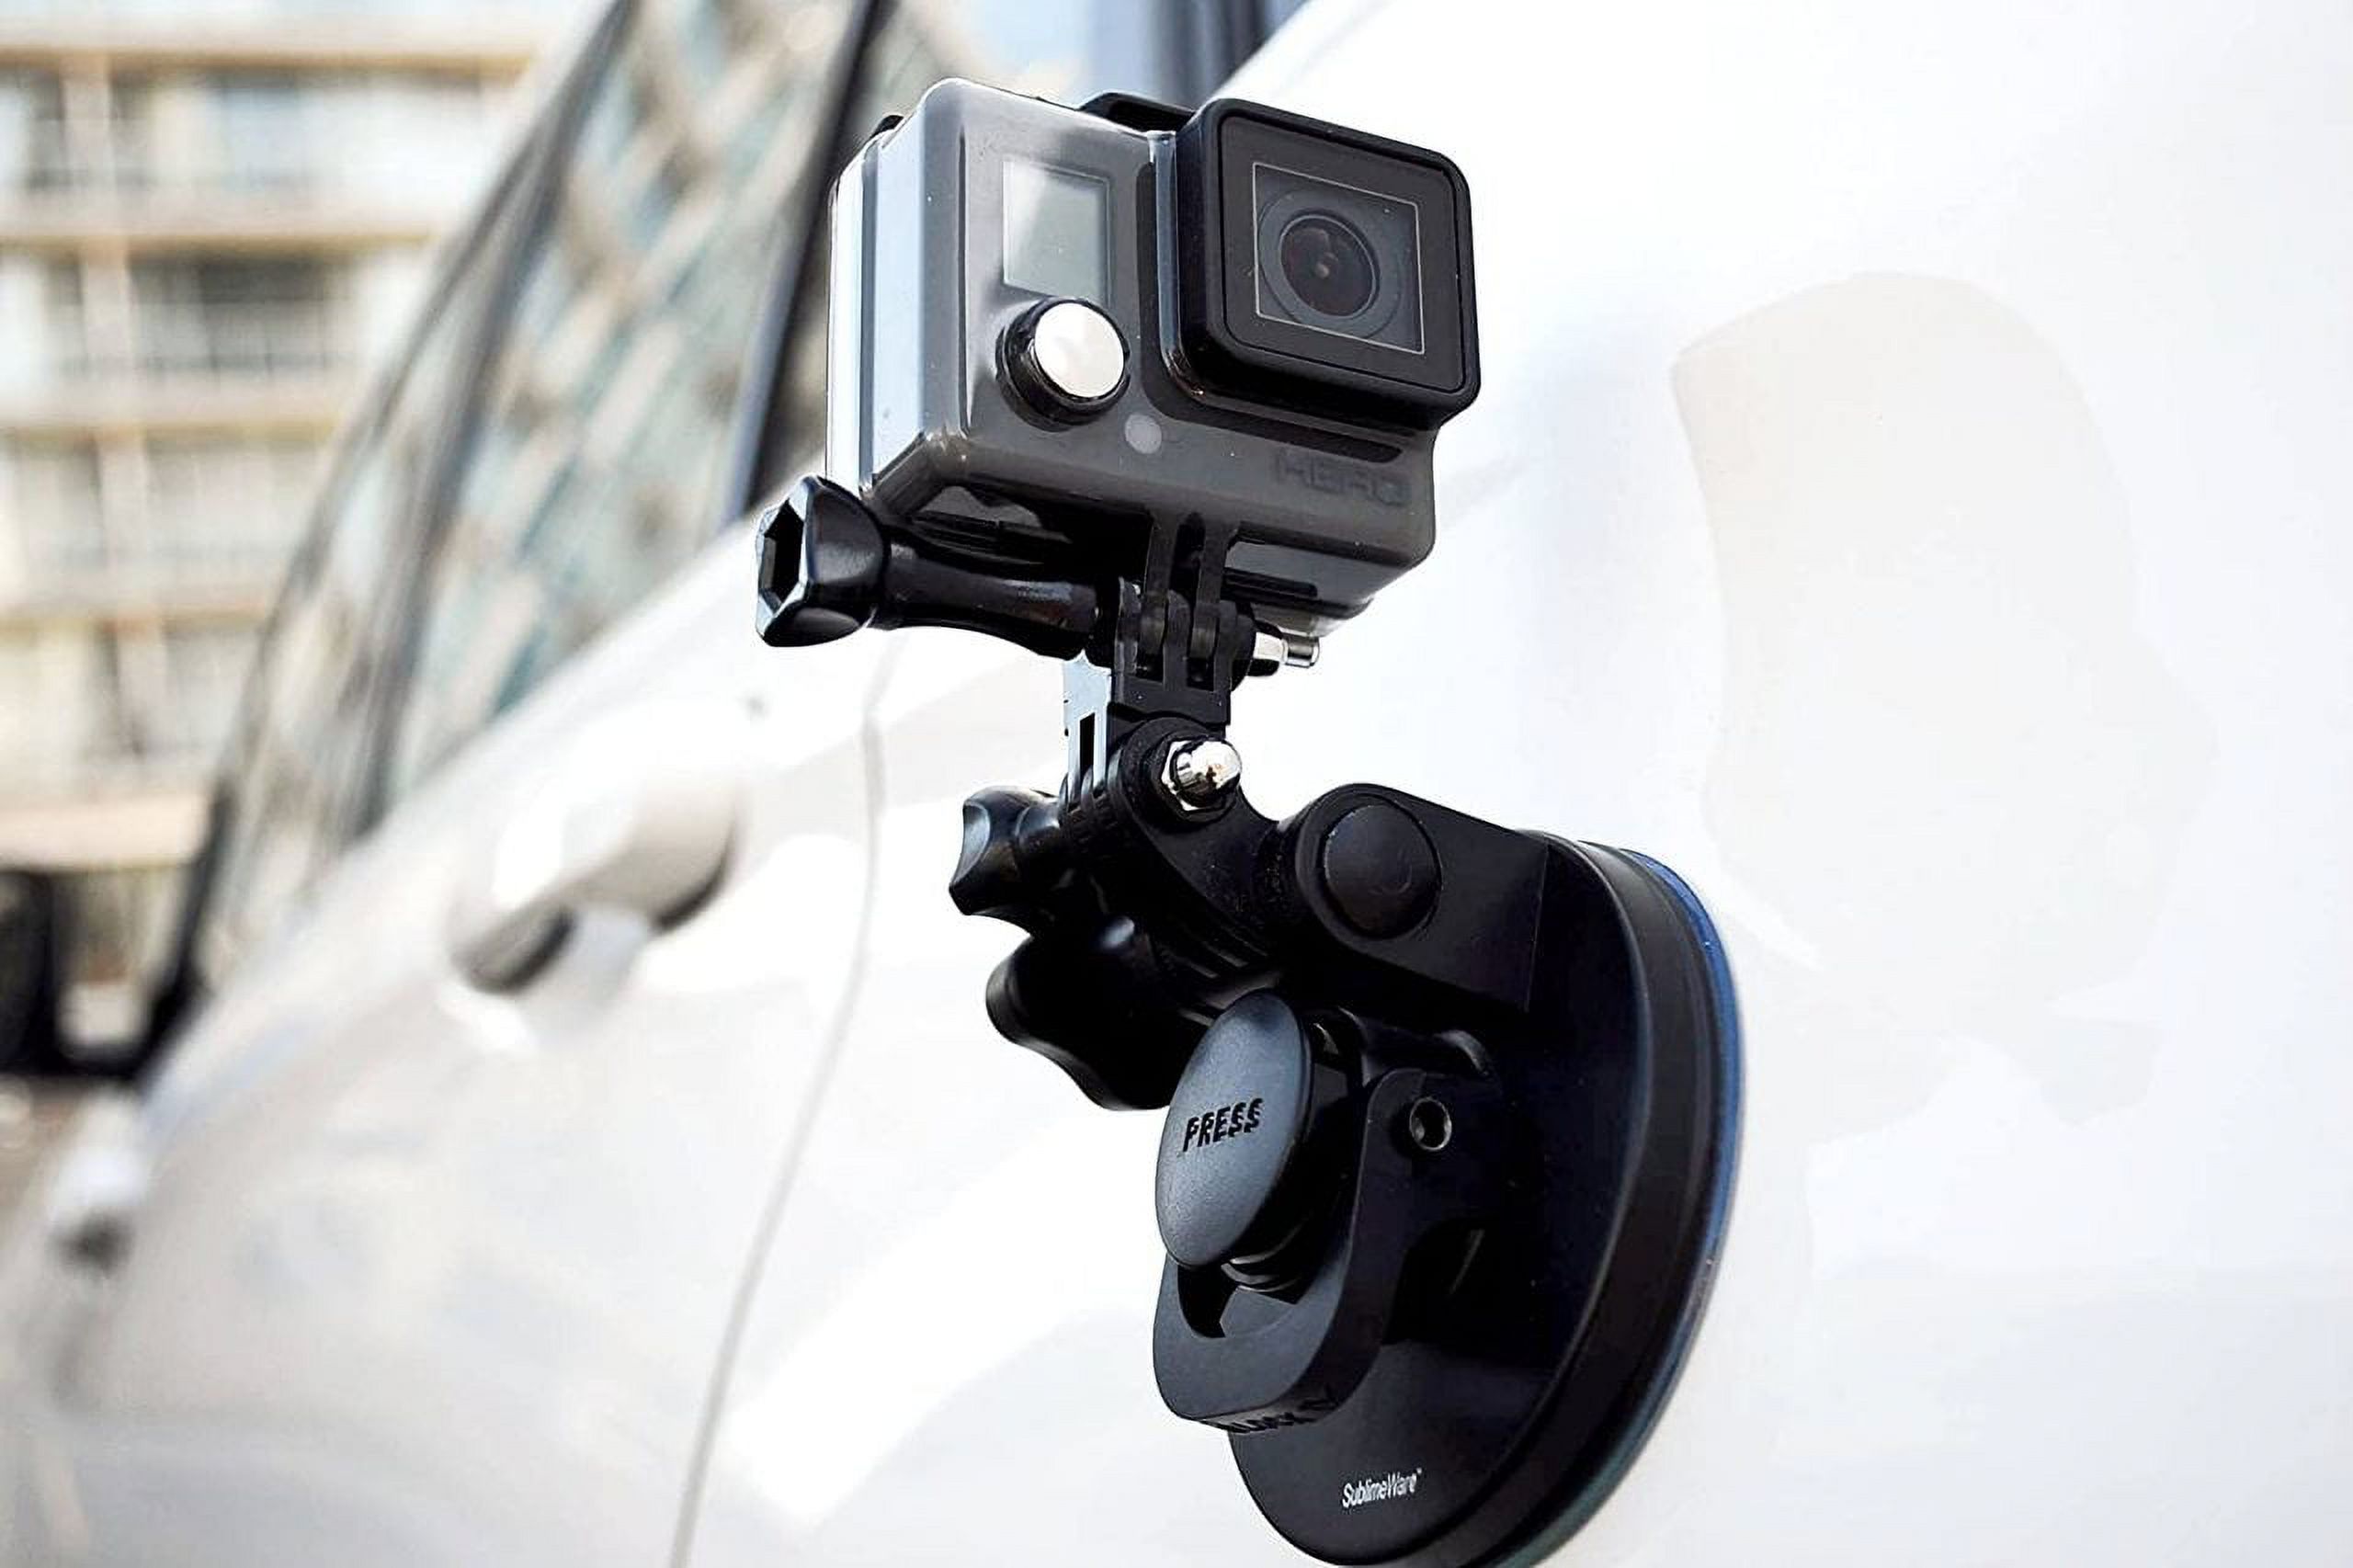 Suction Cup for Gopro Mount Car Windshield Window Vehicle Boat Camera Holder for Gopro Suction Cup Mount Windshield Mount - for GoPro Max 360 Hero 8 Black Hero 7 Hero6 Hero5 Hero4 HD by Su - image 5 of 8